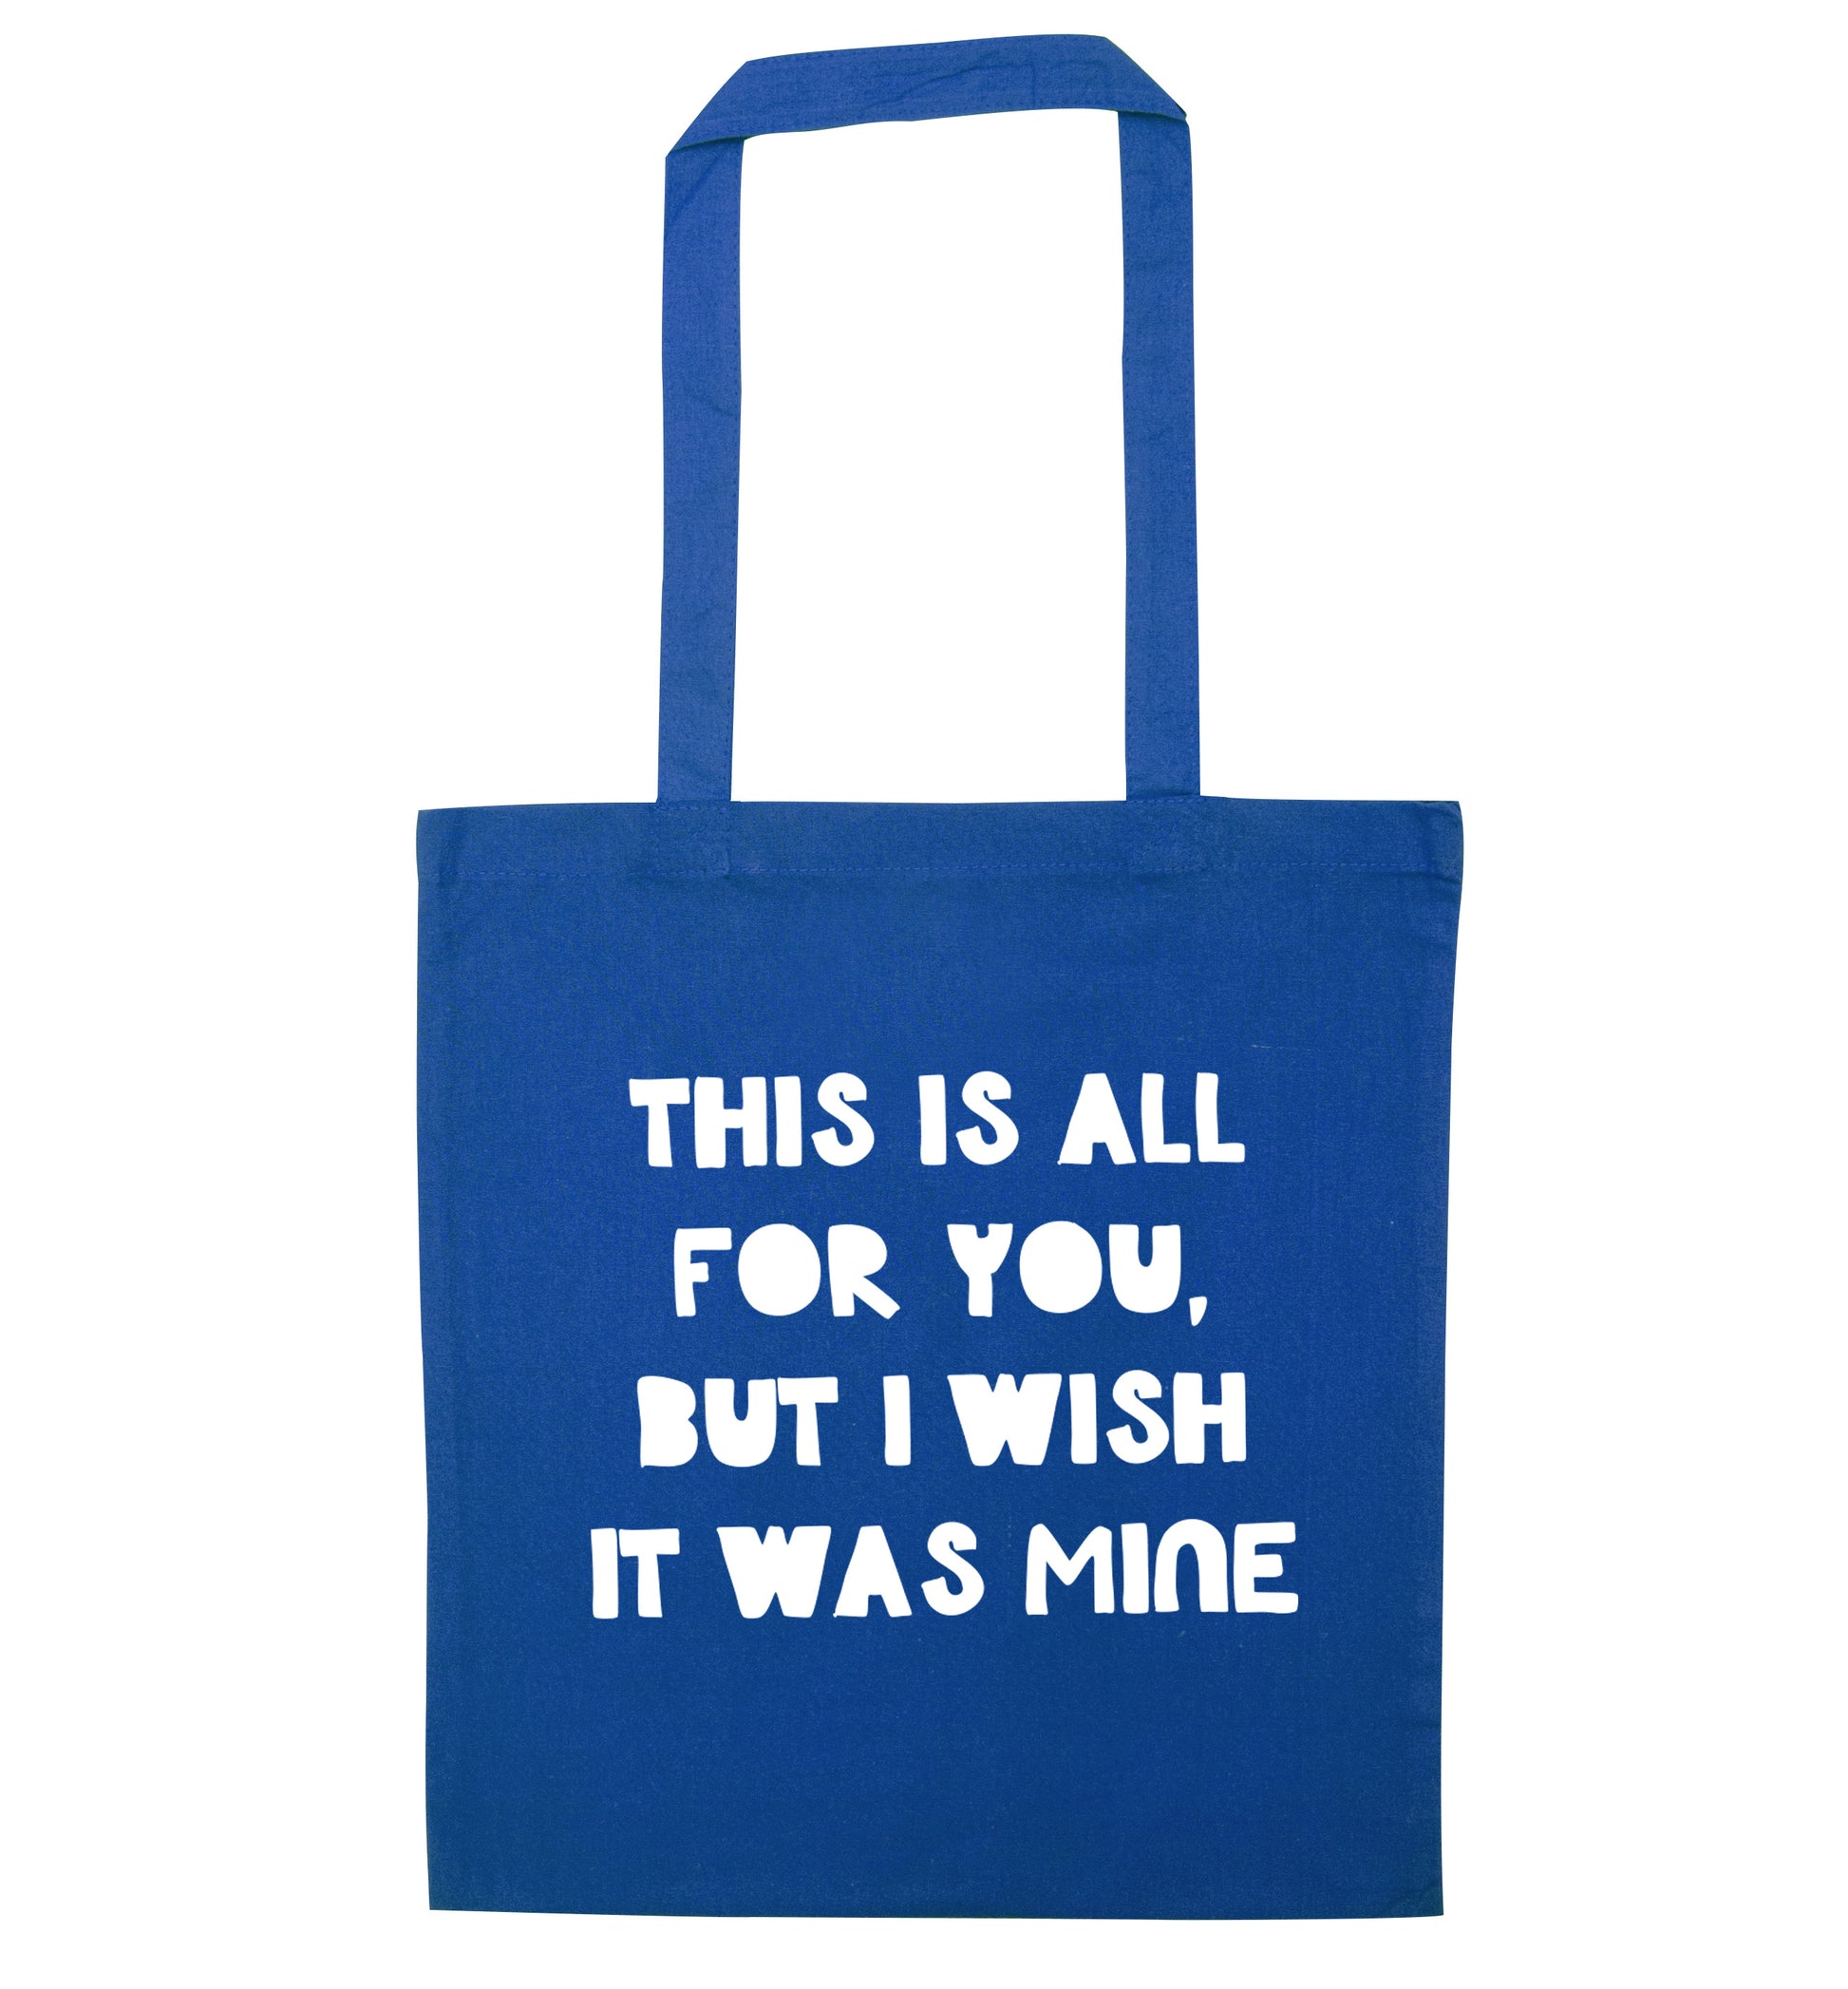 This is all for you but I wish it was mine blue tote bag